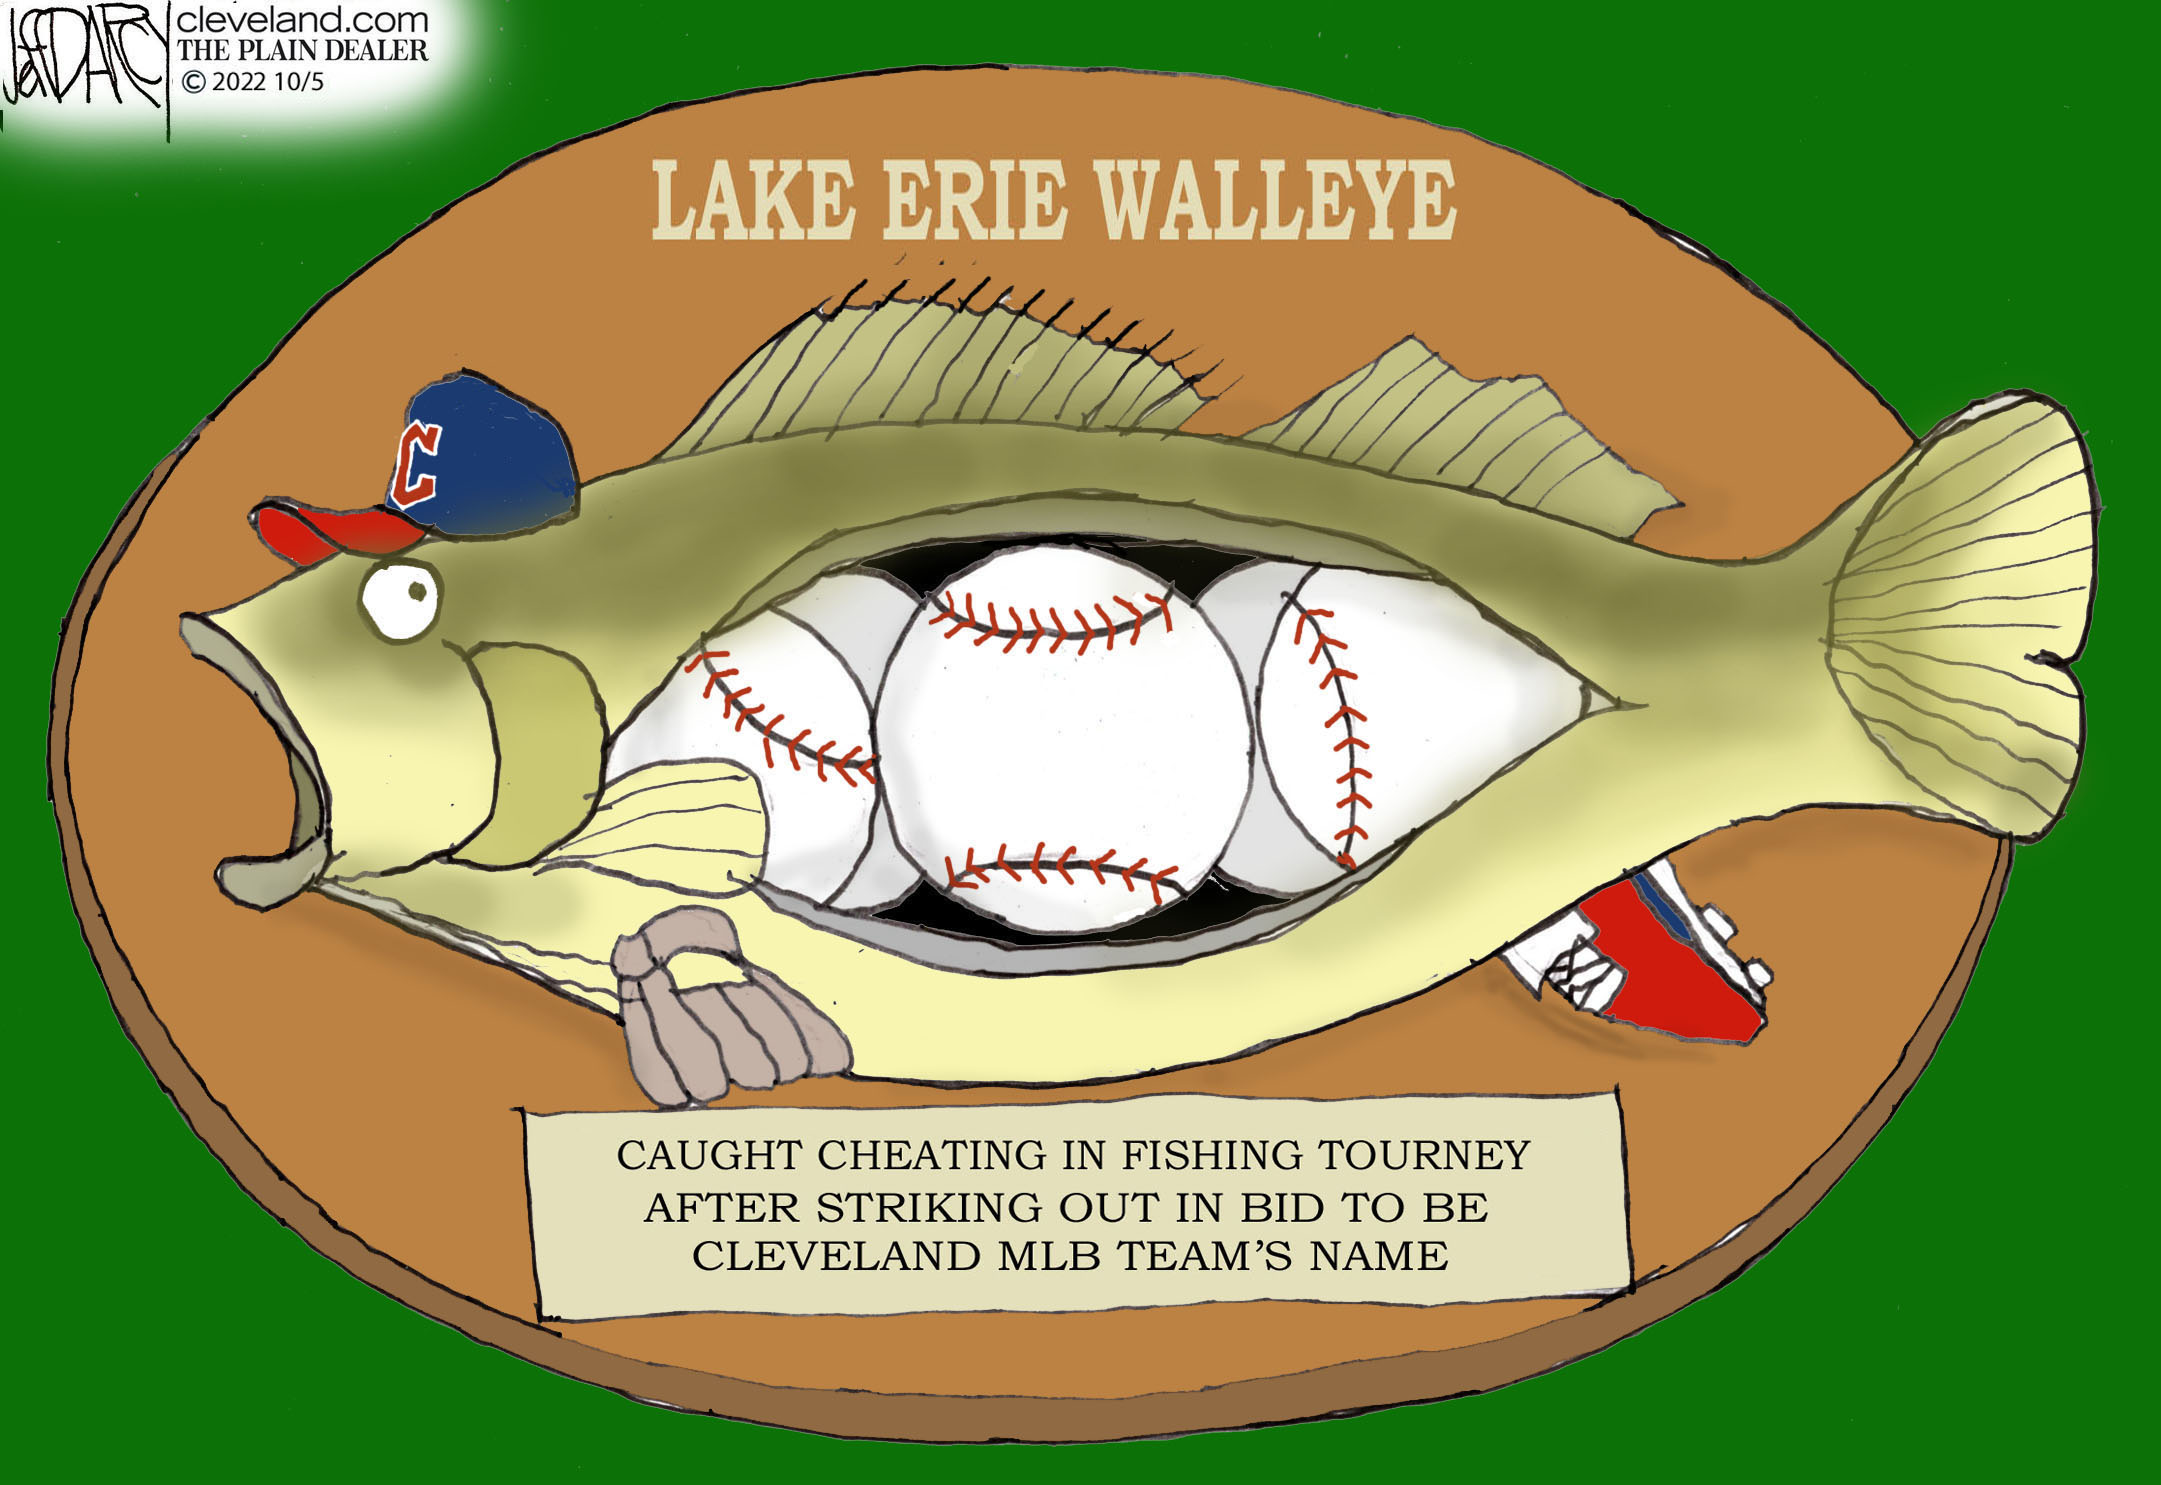 Guardian catches Walleye tourney cheating: Darcy cartoon 